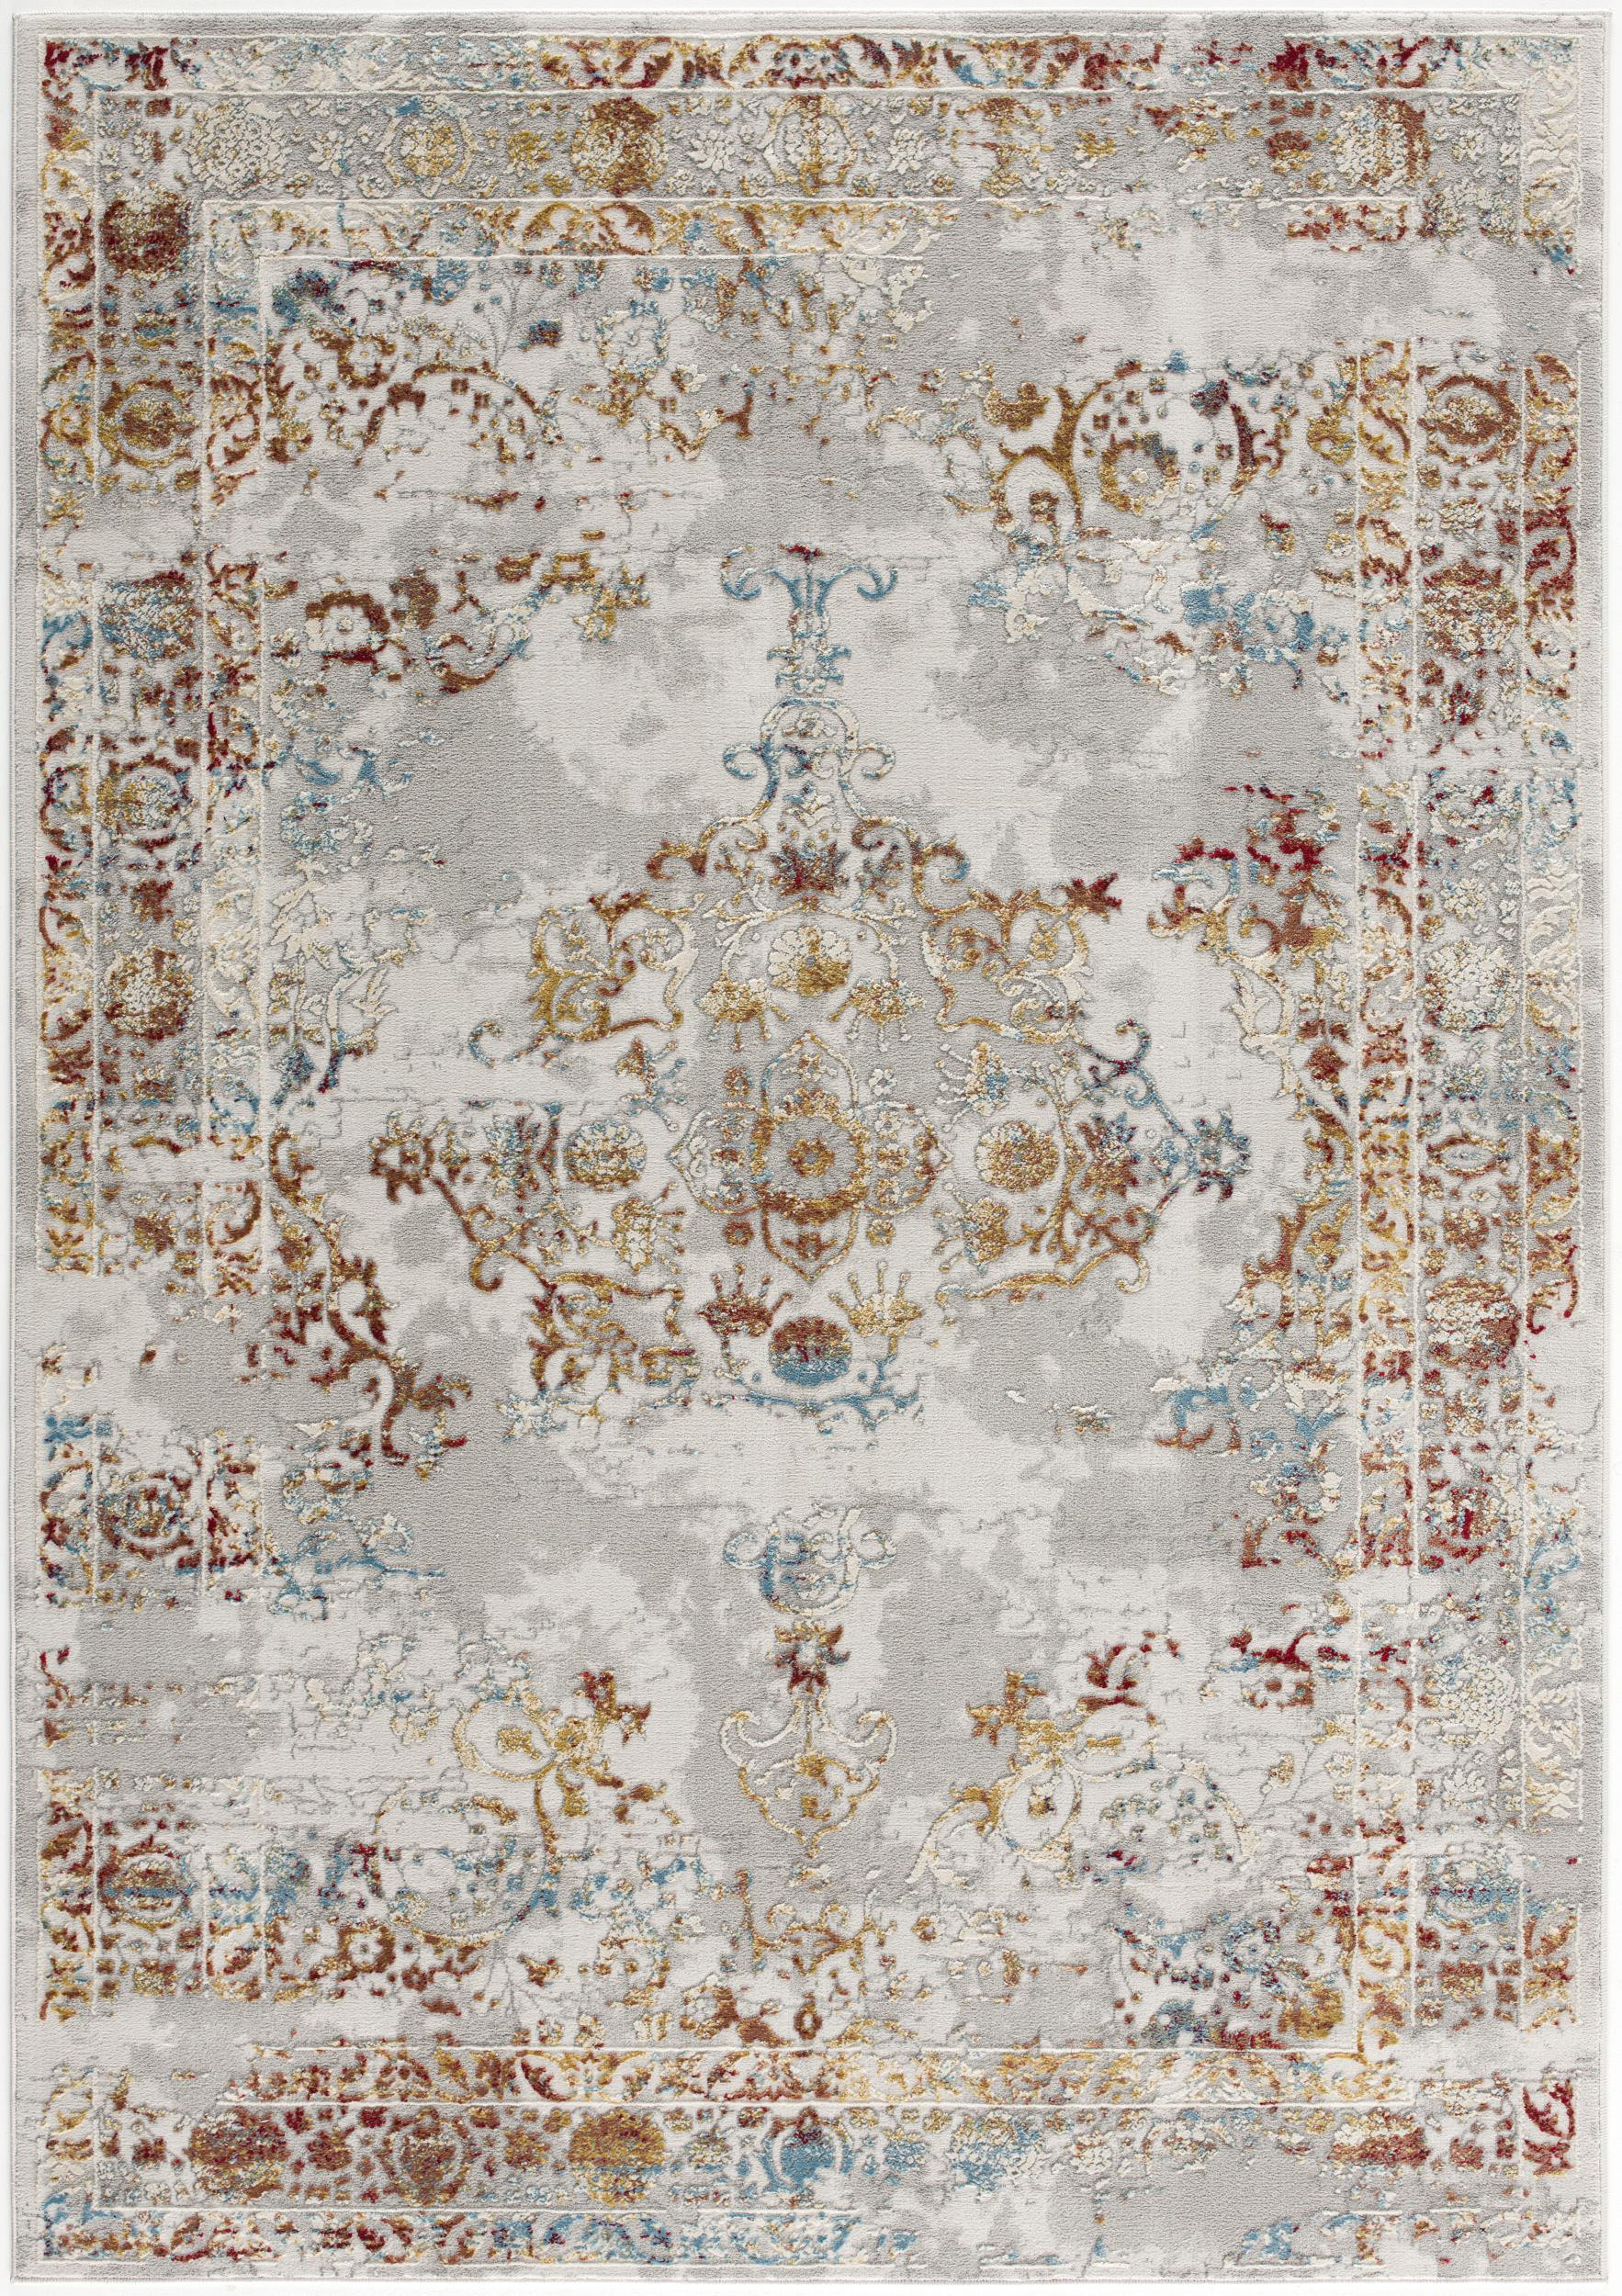 3’ X 5’ Gray And Beige Distressed Ornate Area Rug-390559-1